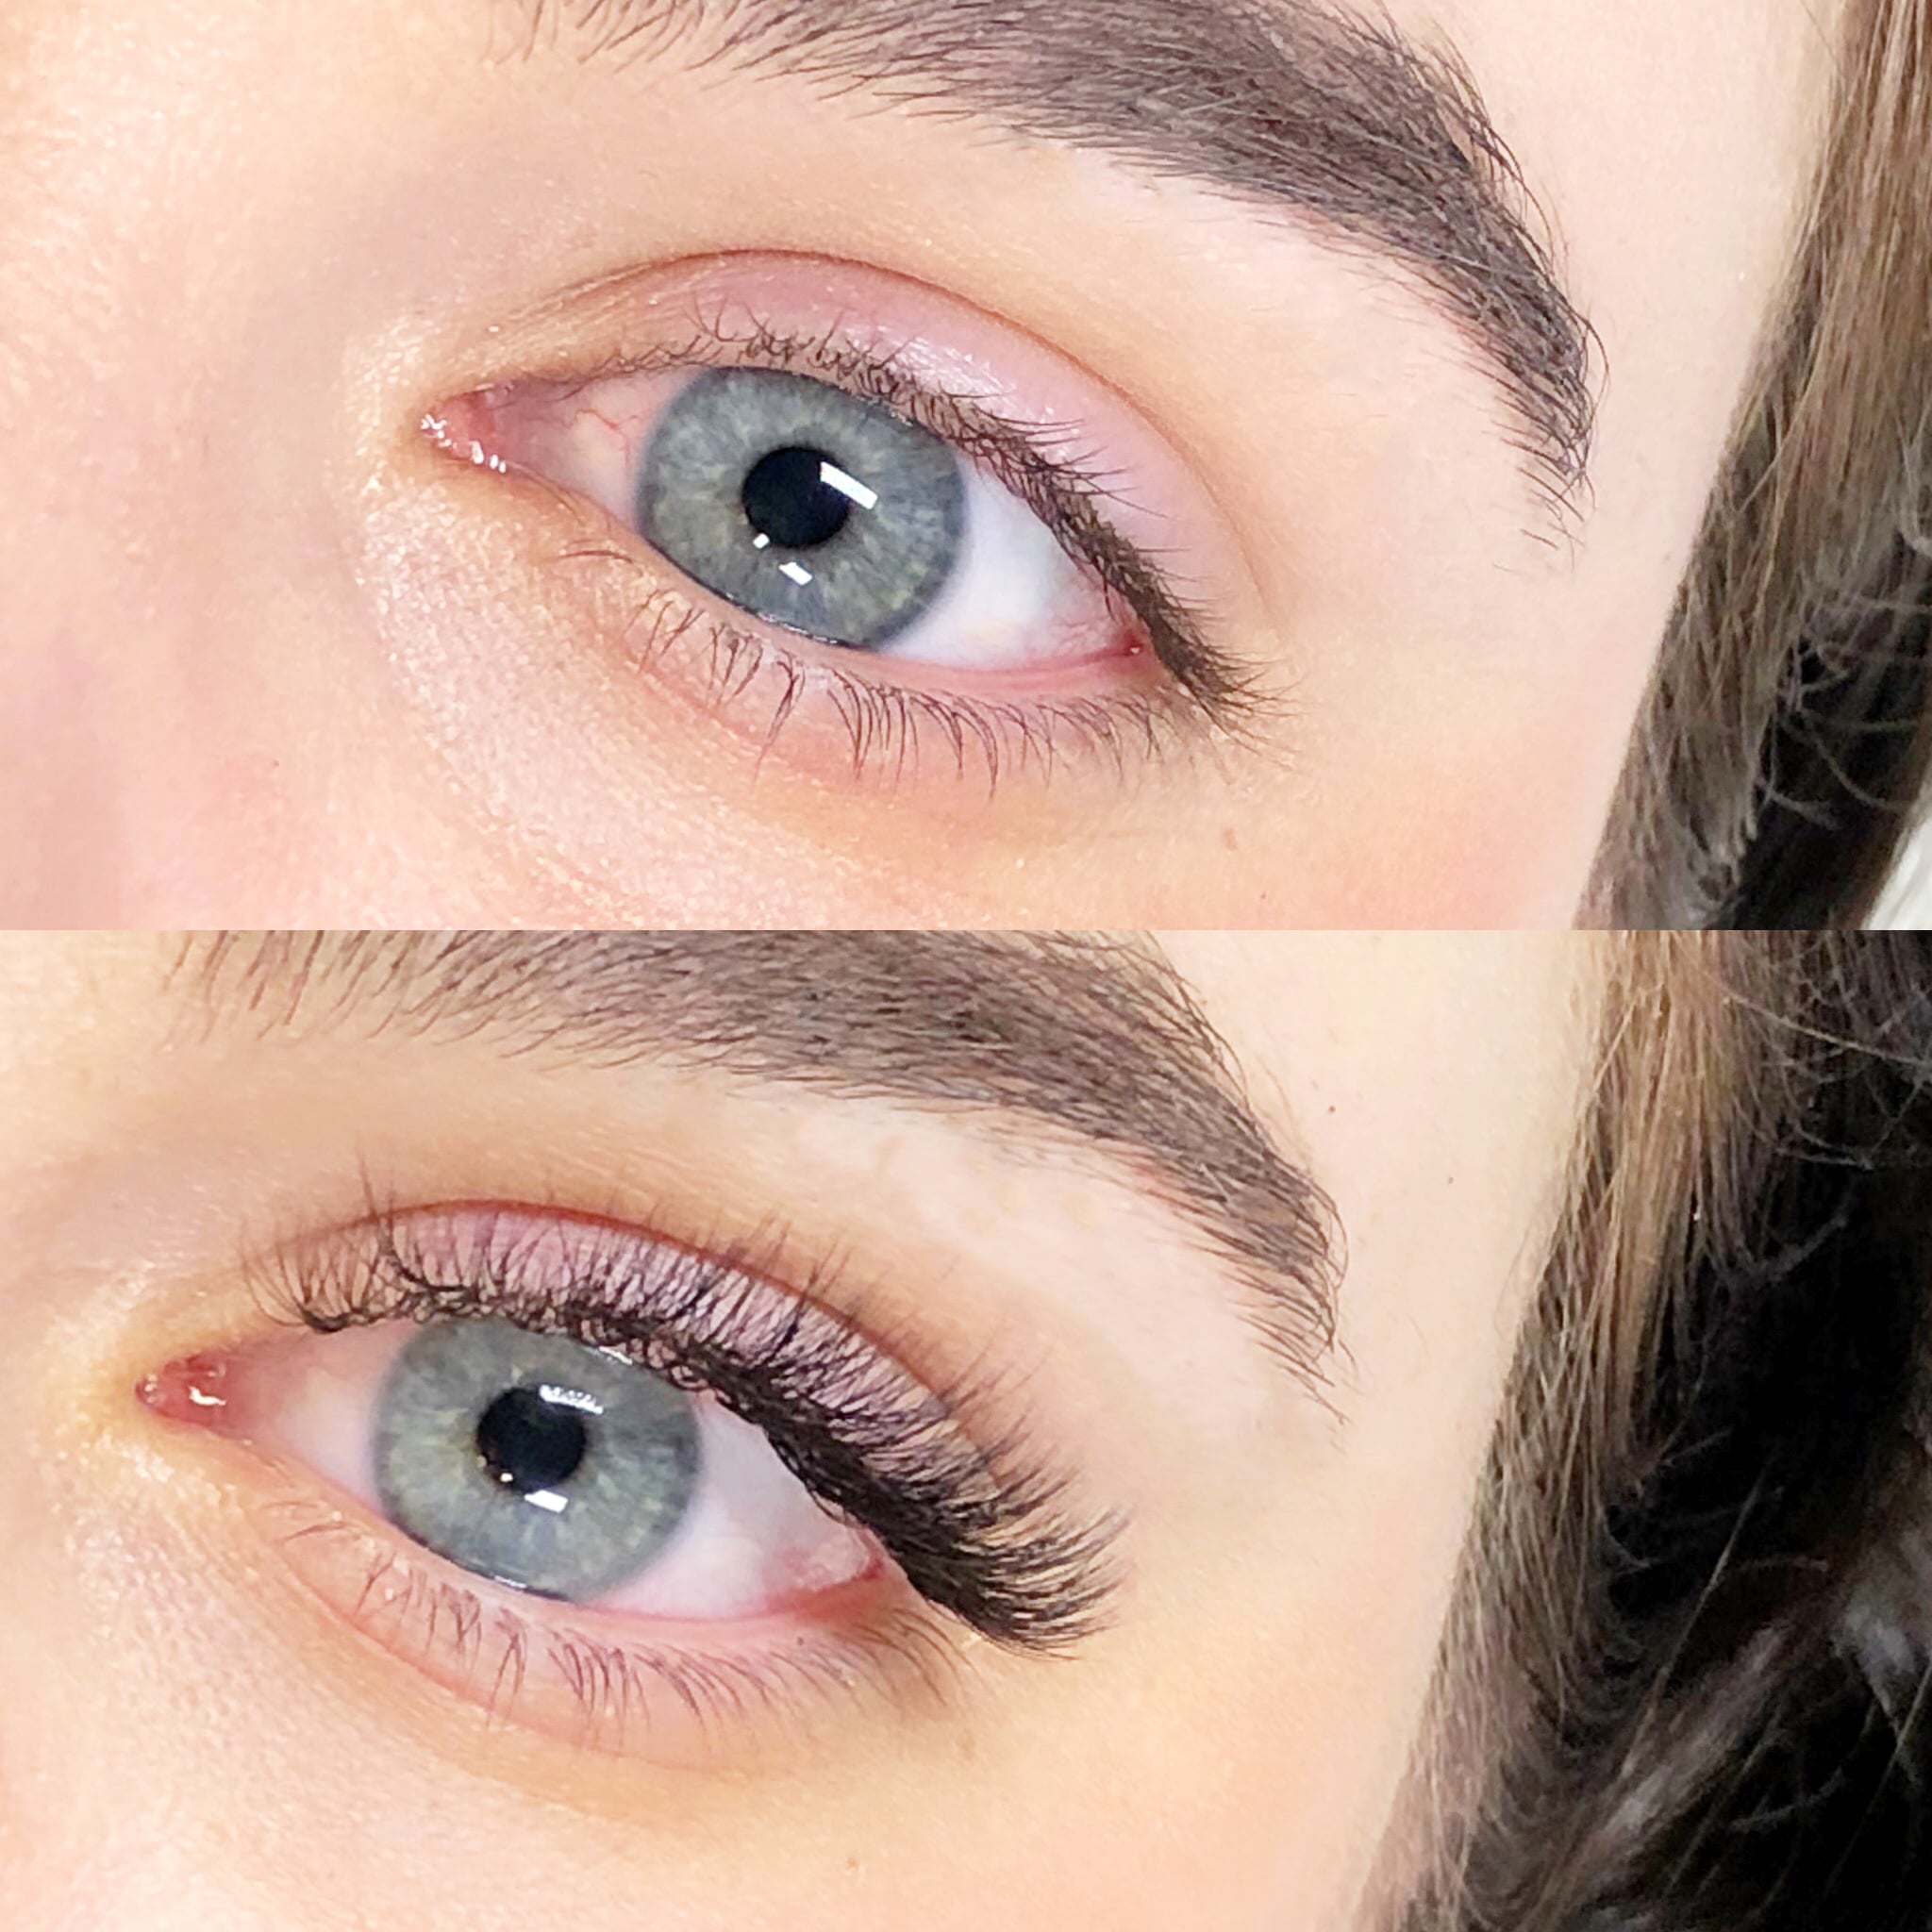 How to do makeup with eyelash extensions